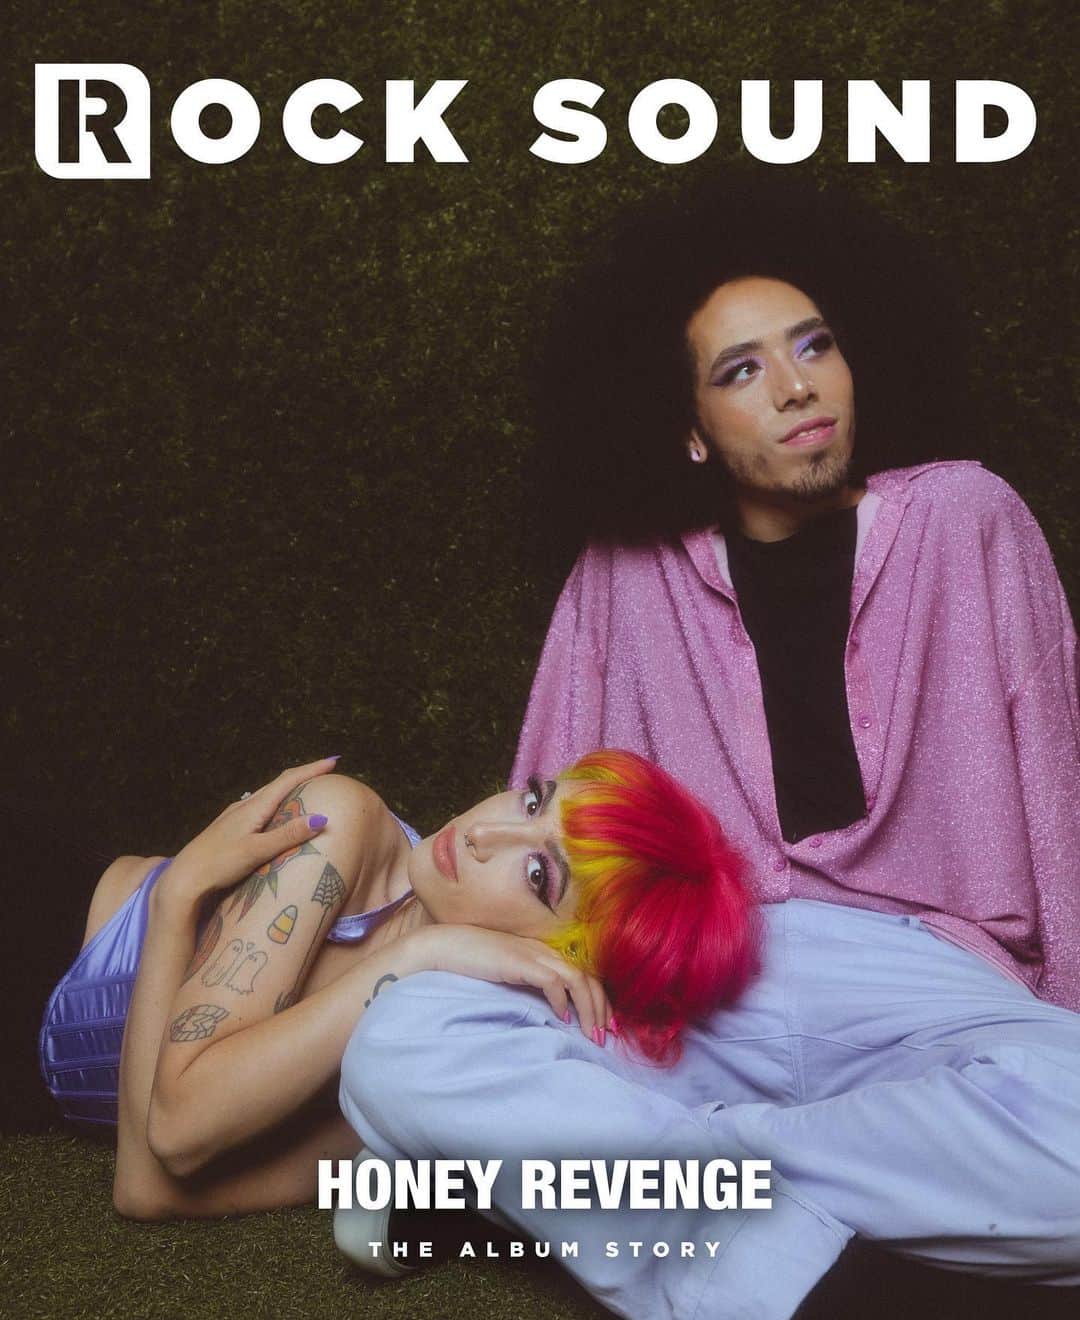 Rock Soundのインスタグラム：「Honey Revenge, ‘Retrovision’ | The Album Story  Devin Papadol and Donovan Lloyd guide us through the making of their debut album in our latest digital cover feature. From combining emo and punk influences with a shiny pop production to their self-deprecating approach to lyrics, this is the inside story of 'Retrovision'  Plus, we have teamed up with the band to put together this exclusive t-shirt, delivered worldwide and only available through Rock Sound  Head to ROCKSOUND.TV to read the feature and get the shirt, link in story  📸 @jordankelseyknight   #honeyrevenge #emo #punk」